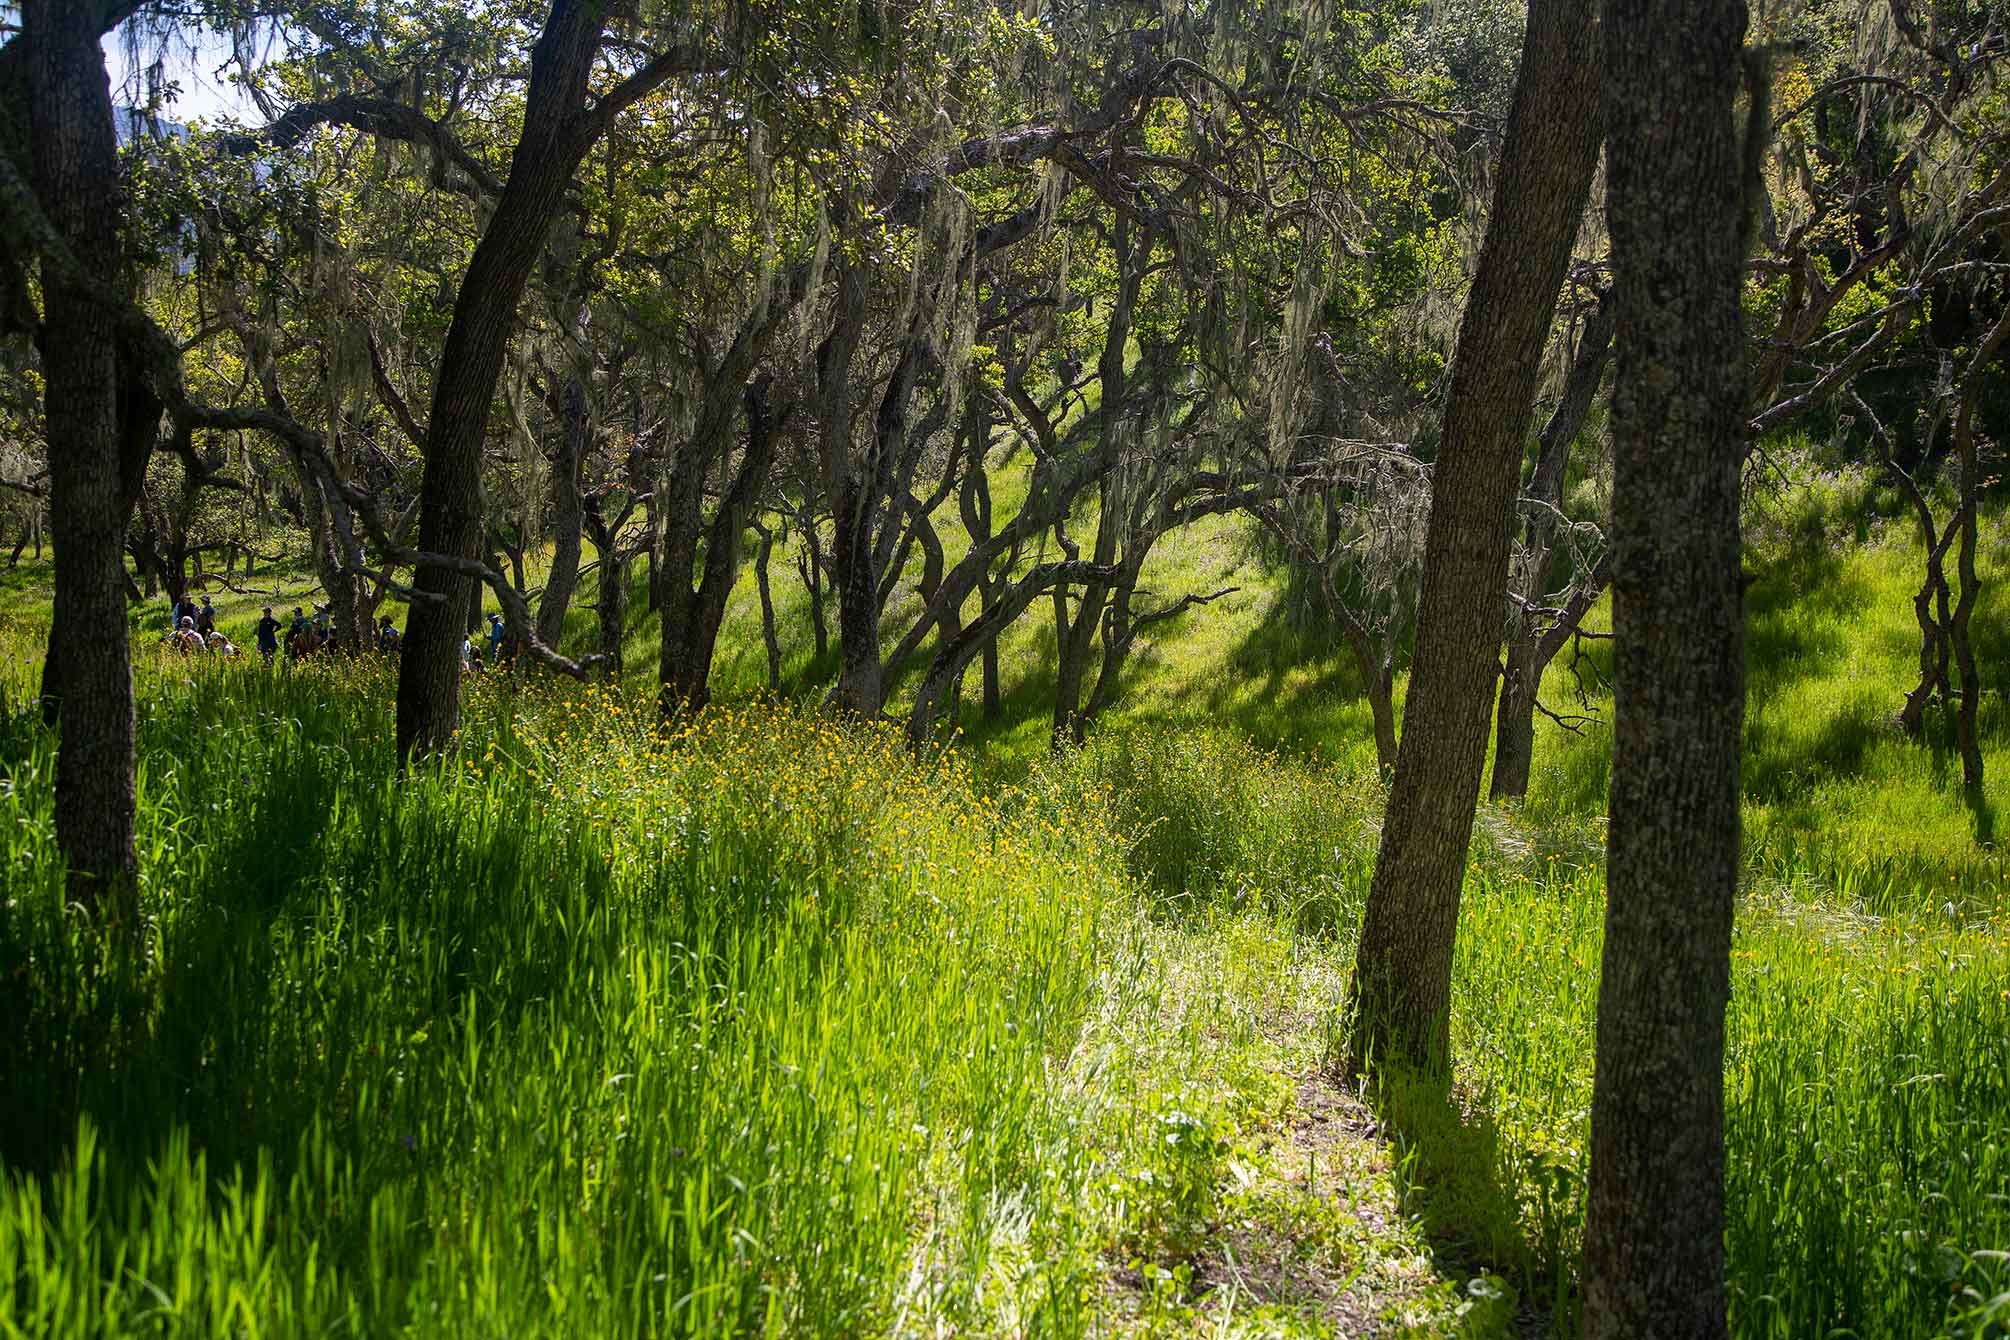 Grasses and annual forbes grow under in the dappled light under an oak canopy. Prescribed fire can burn forest litter and other fuel, preventing dangerous buildup and providing space for a healthy understory to return.